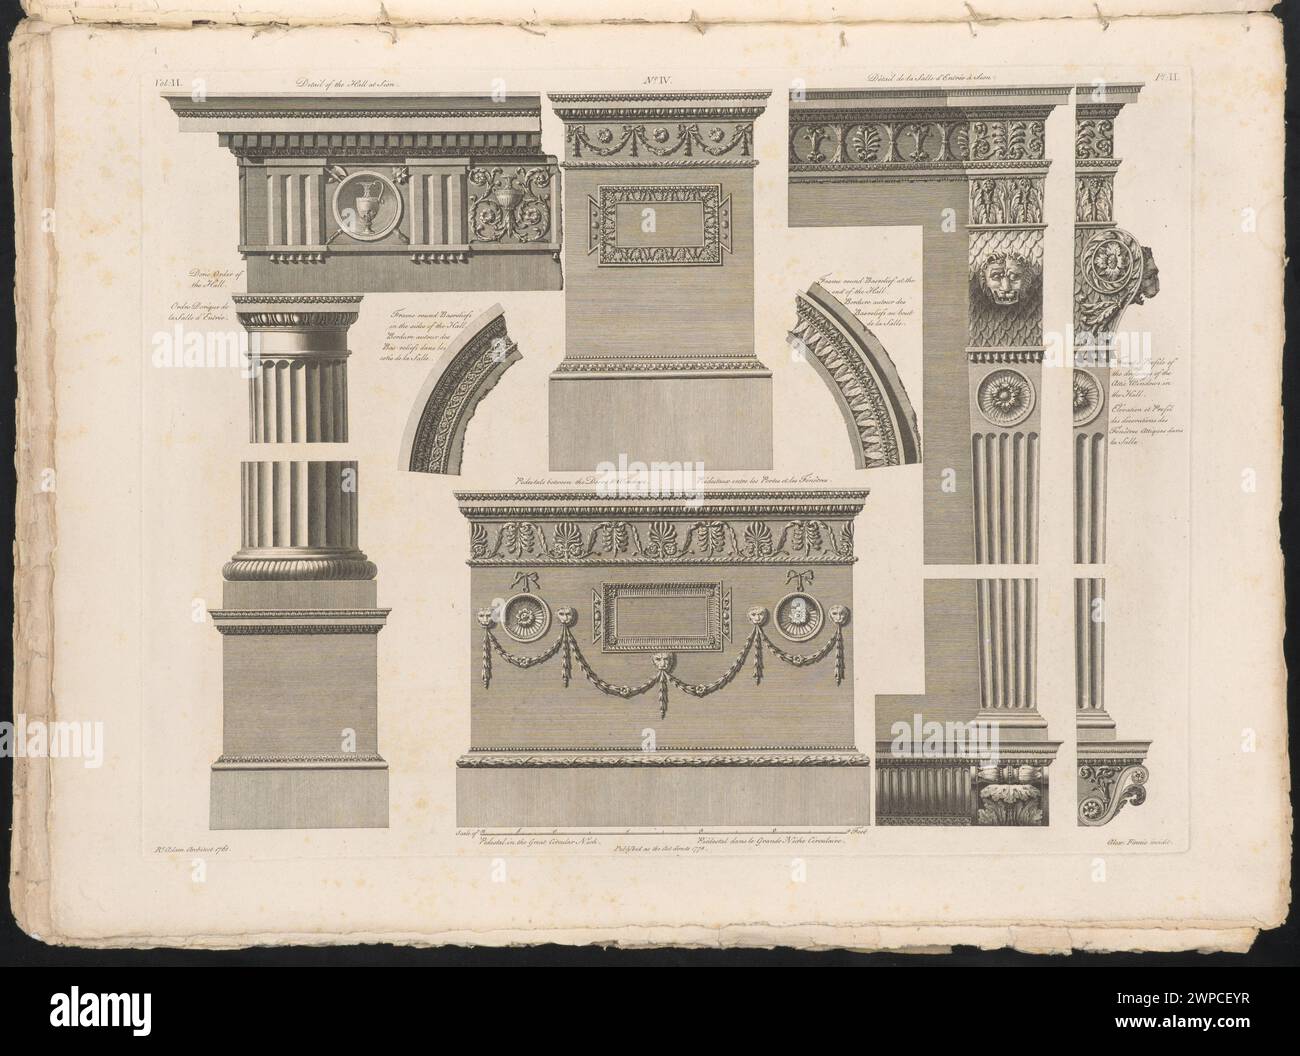 Elements of architectural decorations of the entrance room in the Sion Castle; Finnie, Alexander (fl. Ca 1770-1778), Adam, Robert (1728-1792); 1778 (1778-00-00-1786-00-00); Stock Photo